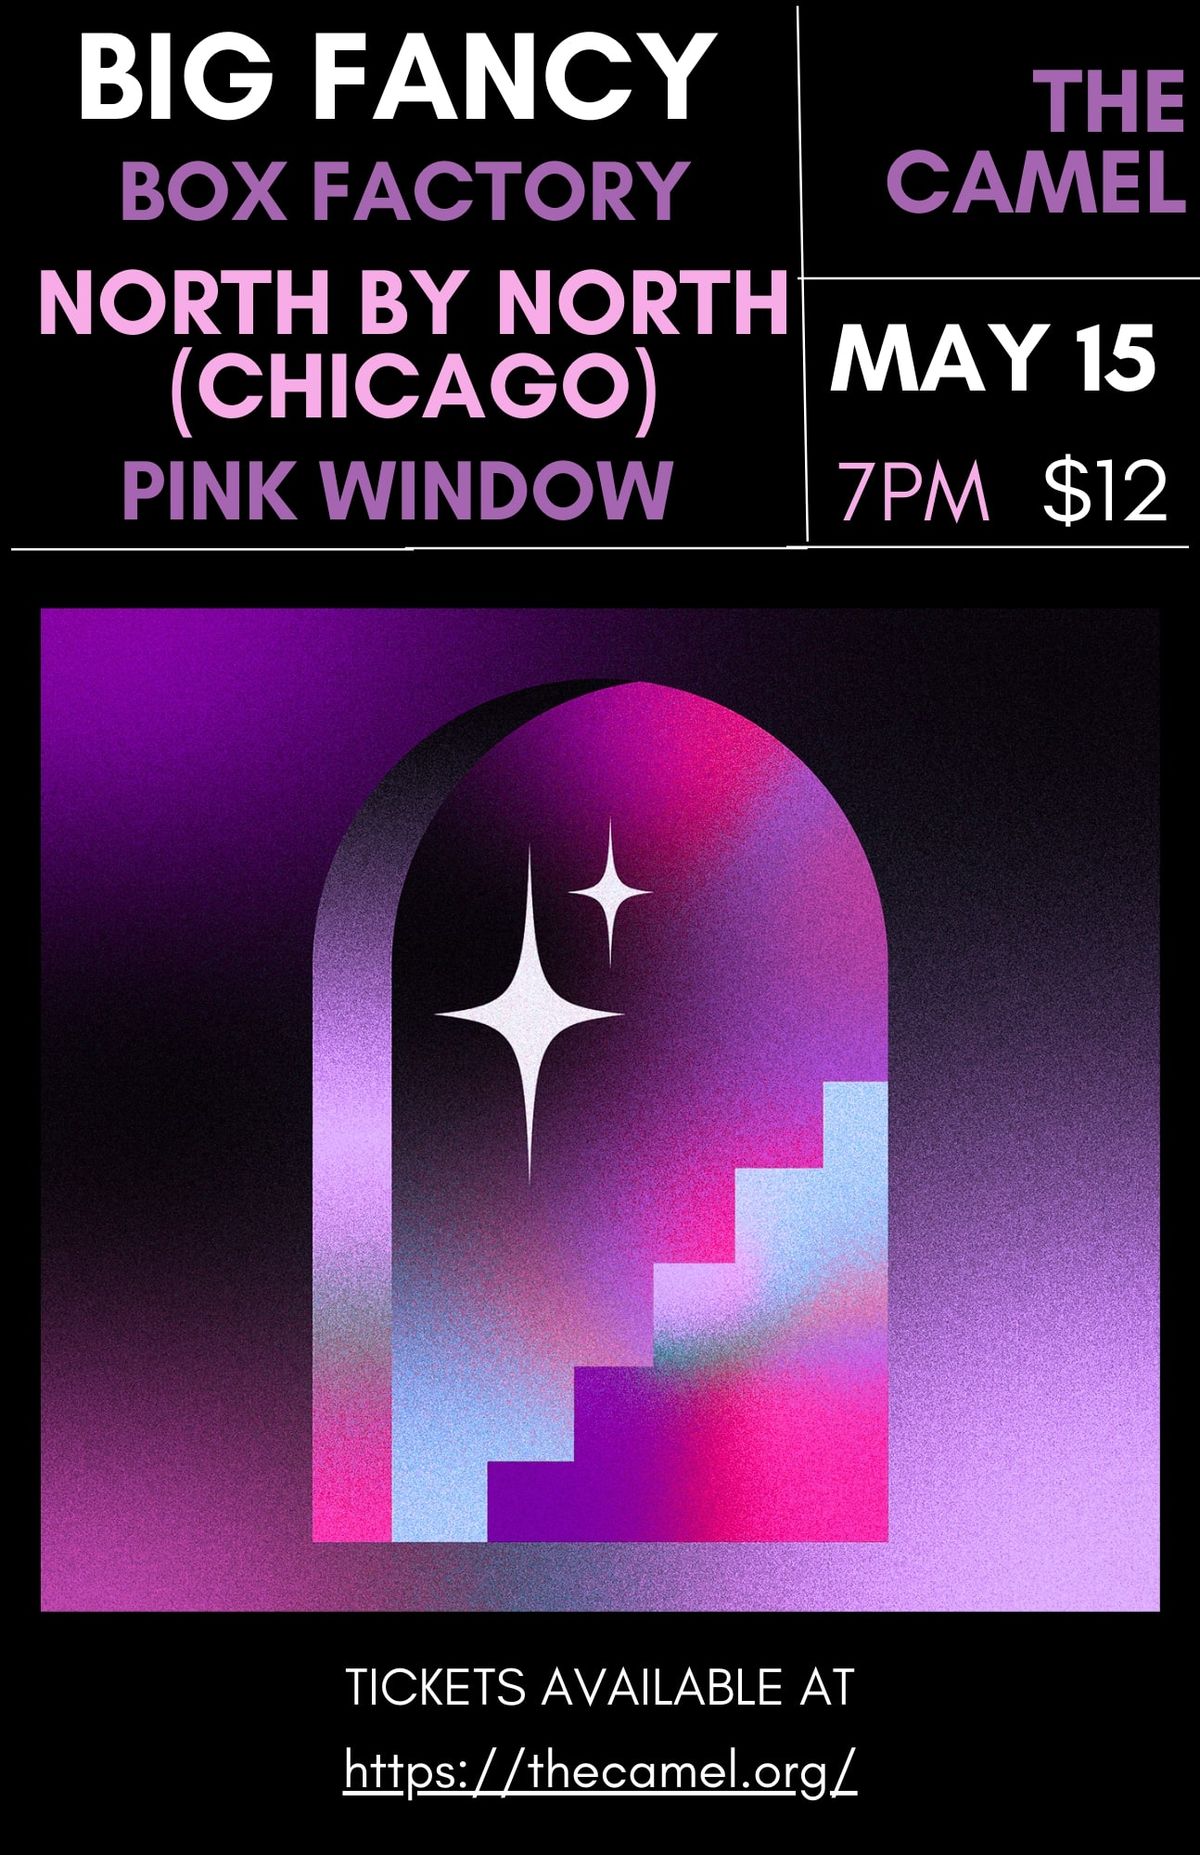 Big Fancy, Box Factory, North by North, Pink Window at The Camel 5.15